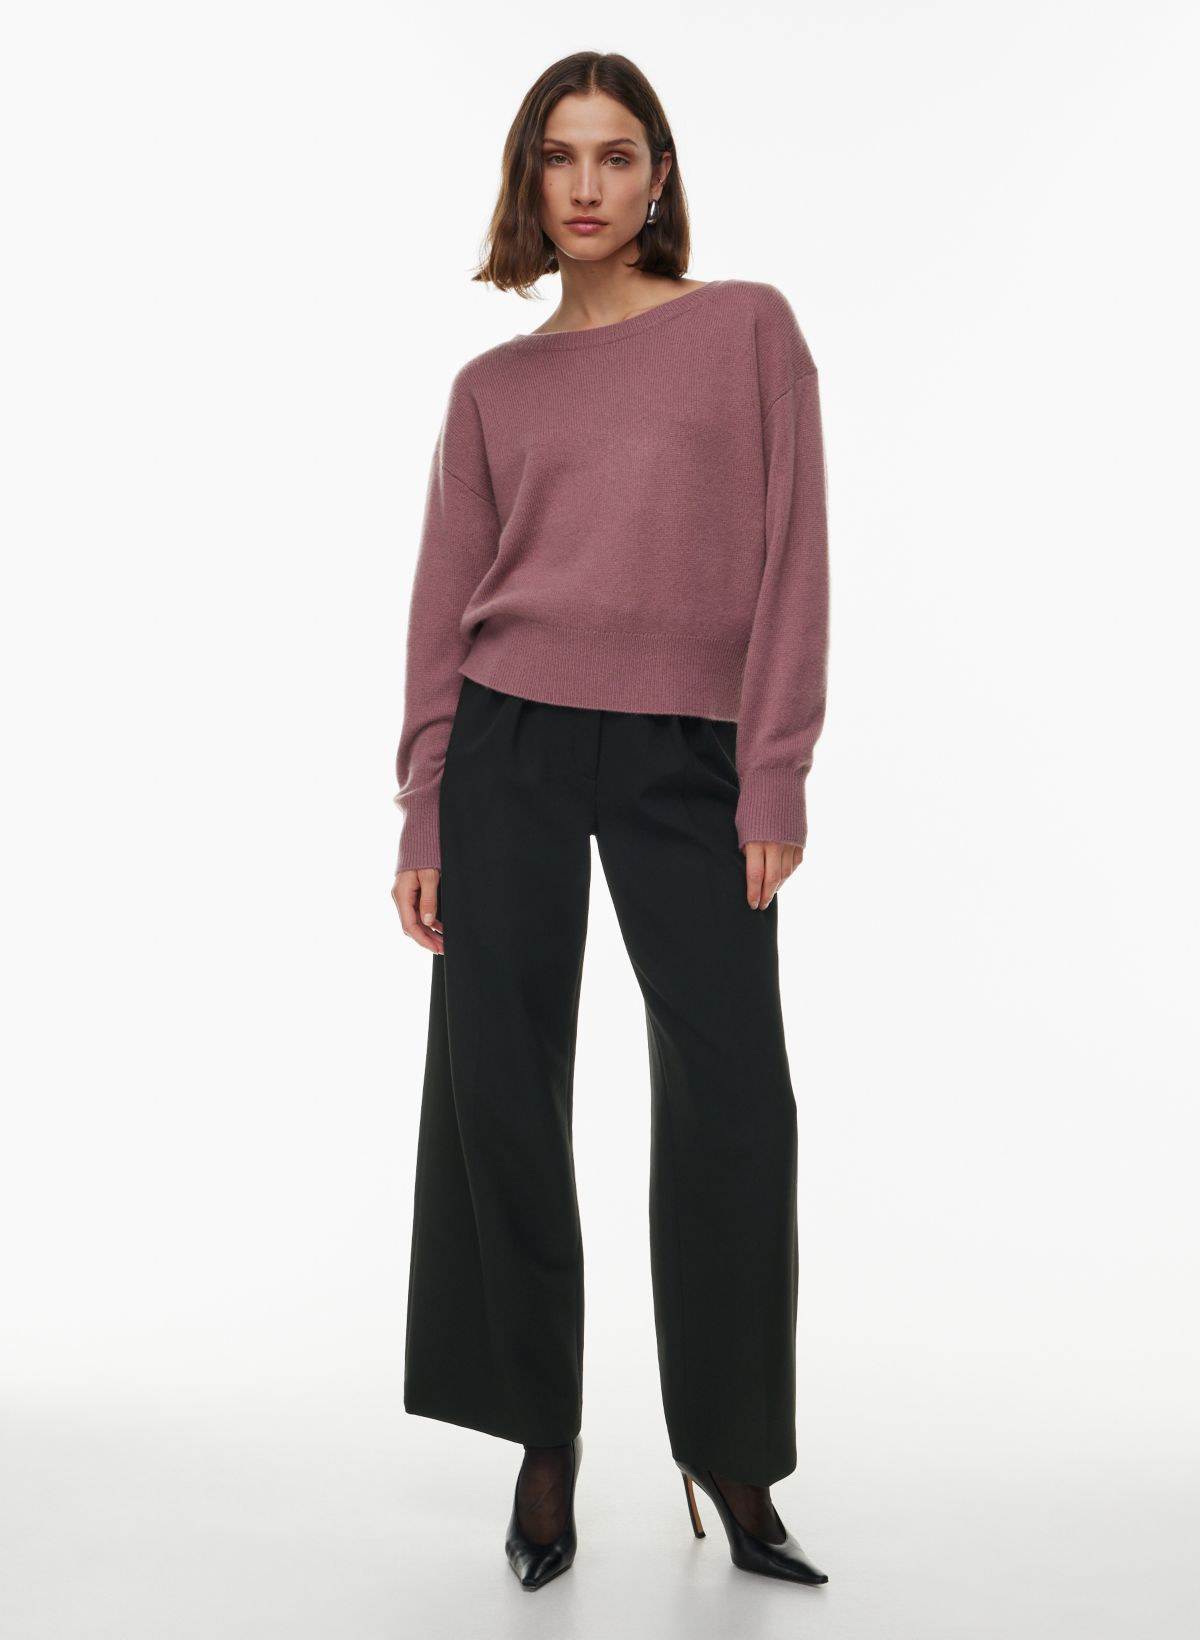 Babaton LUXE CASHMERE SESSION SWEATER